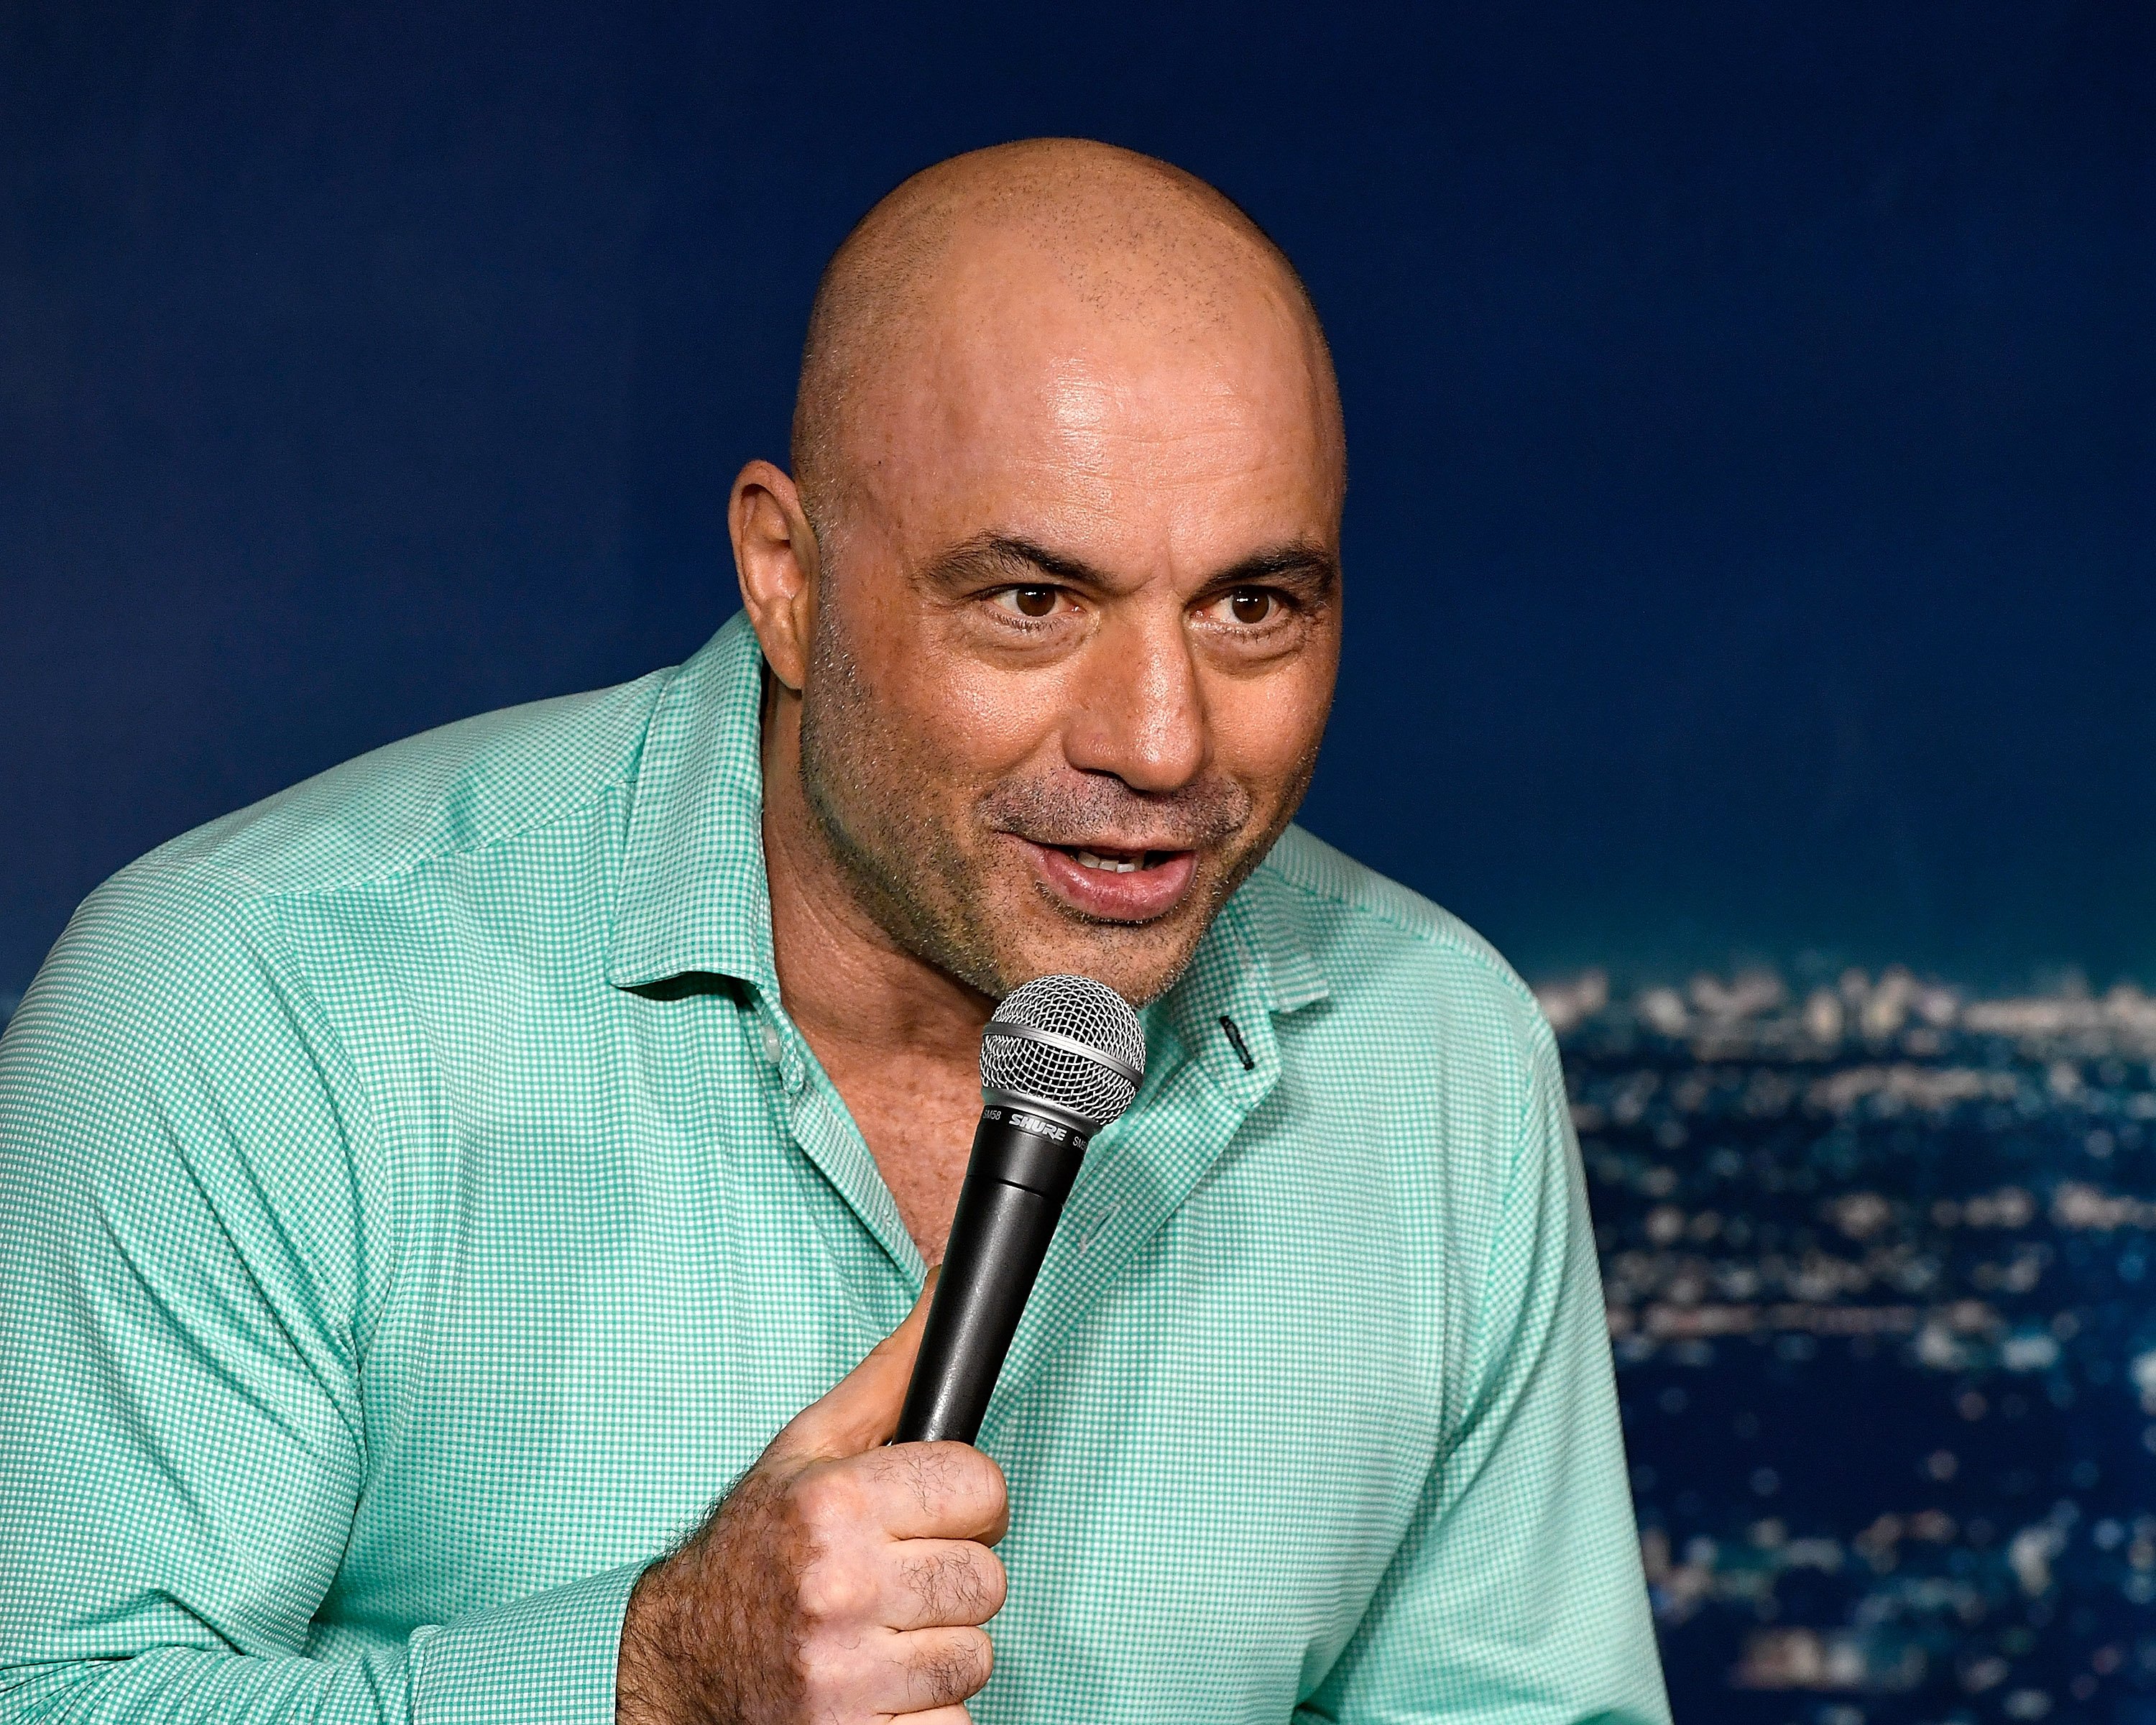 Joe Rogan Fans Theorize About Why the Comedian Never Speaks of His Wife and Kids